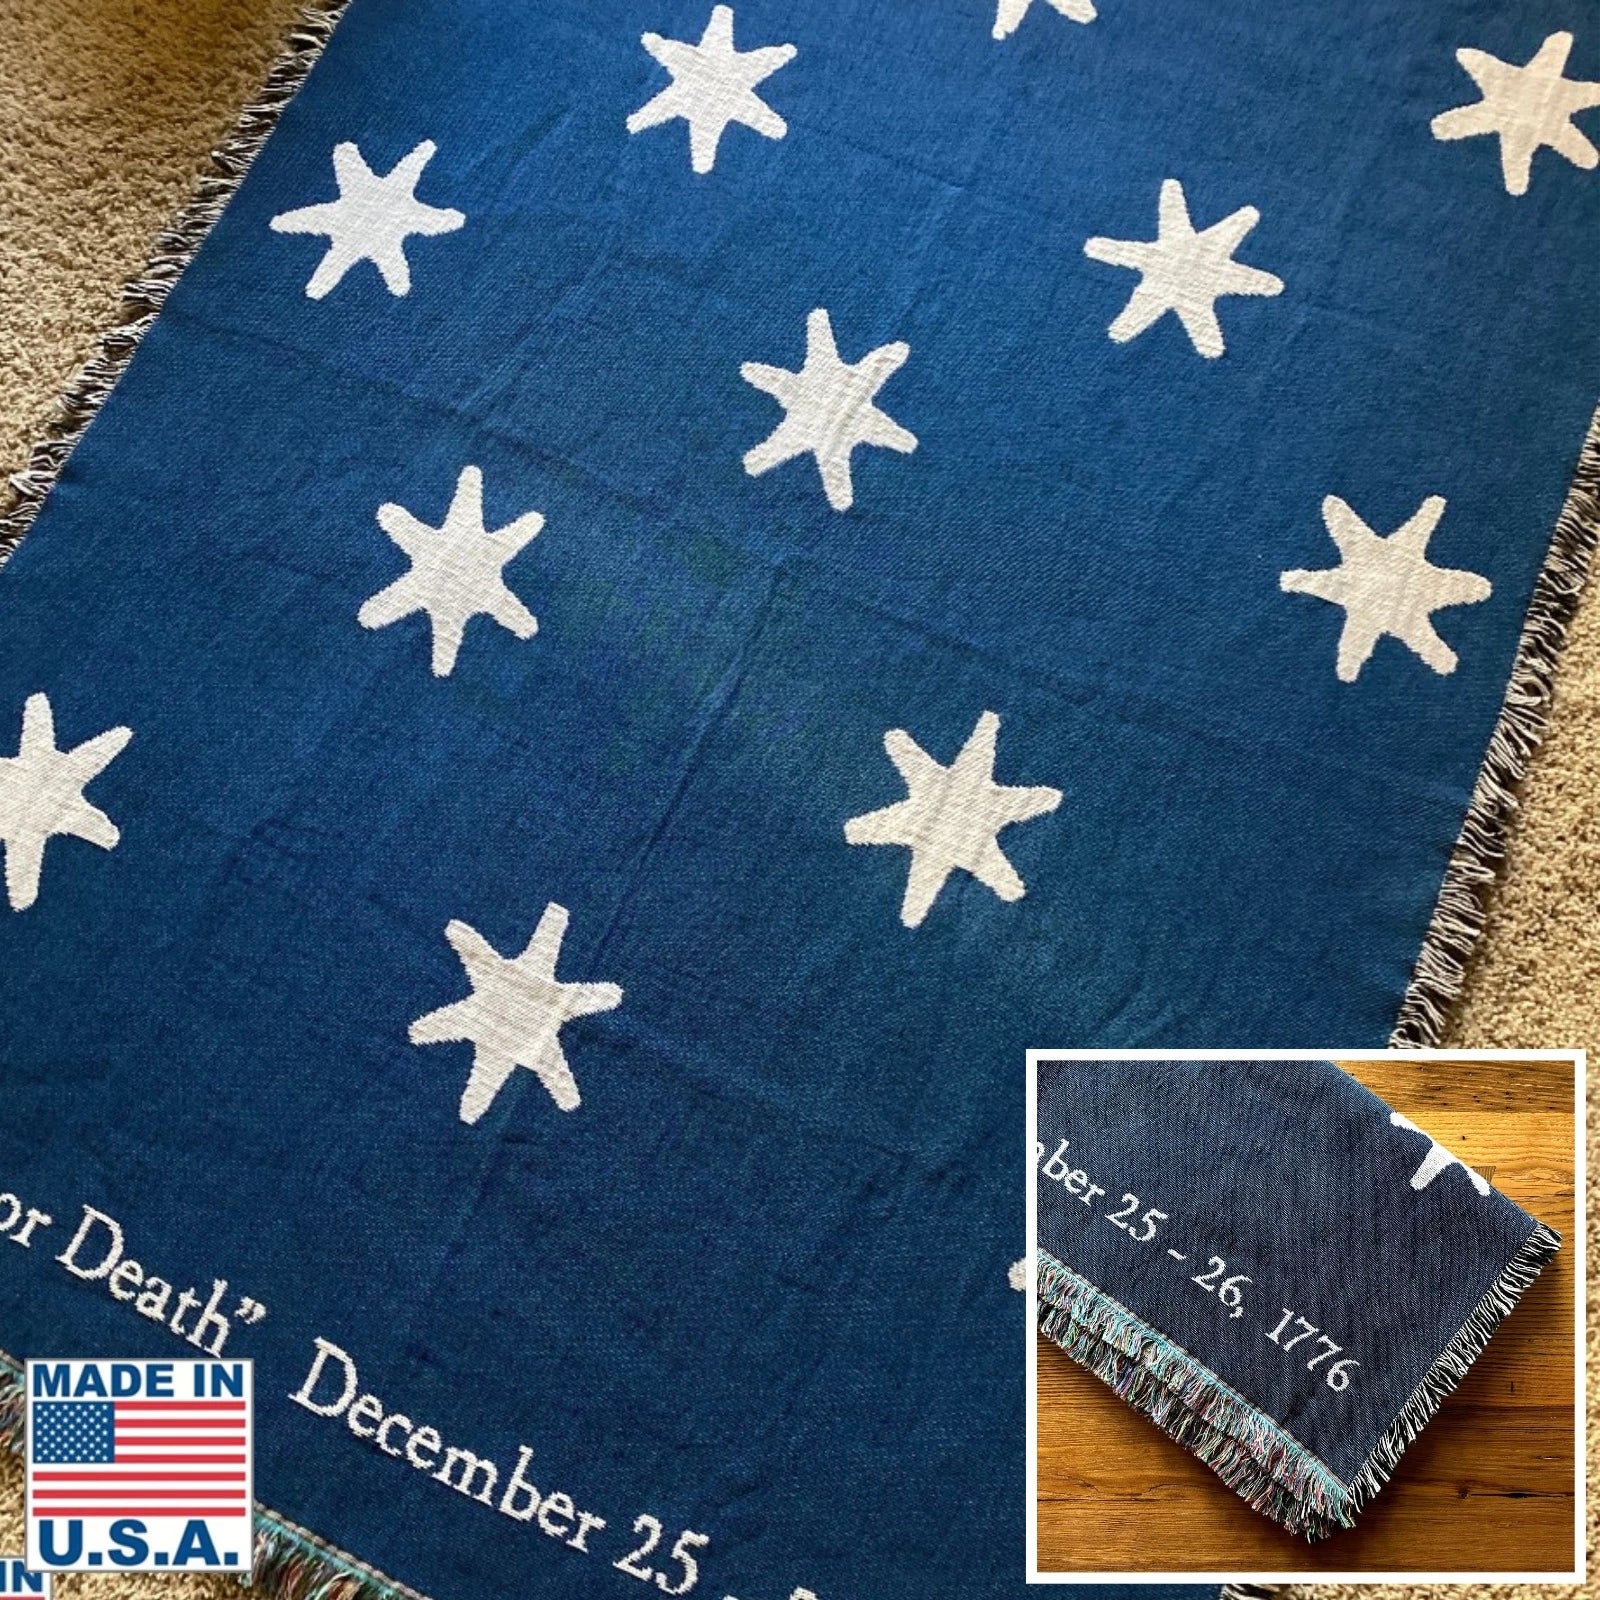 "Victory" blanket woven in the US showing the stars from Washington's HQs flag from The History List store